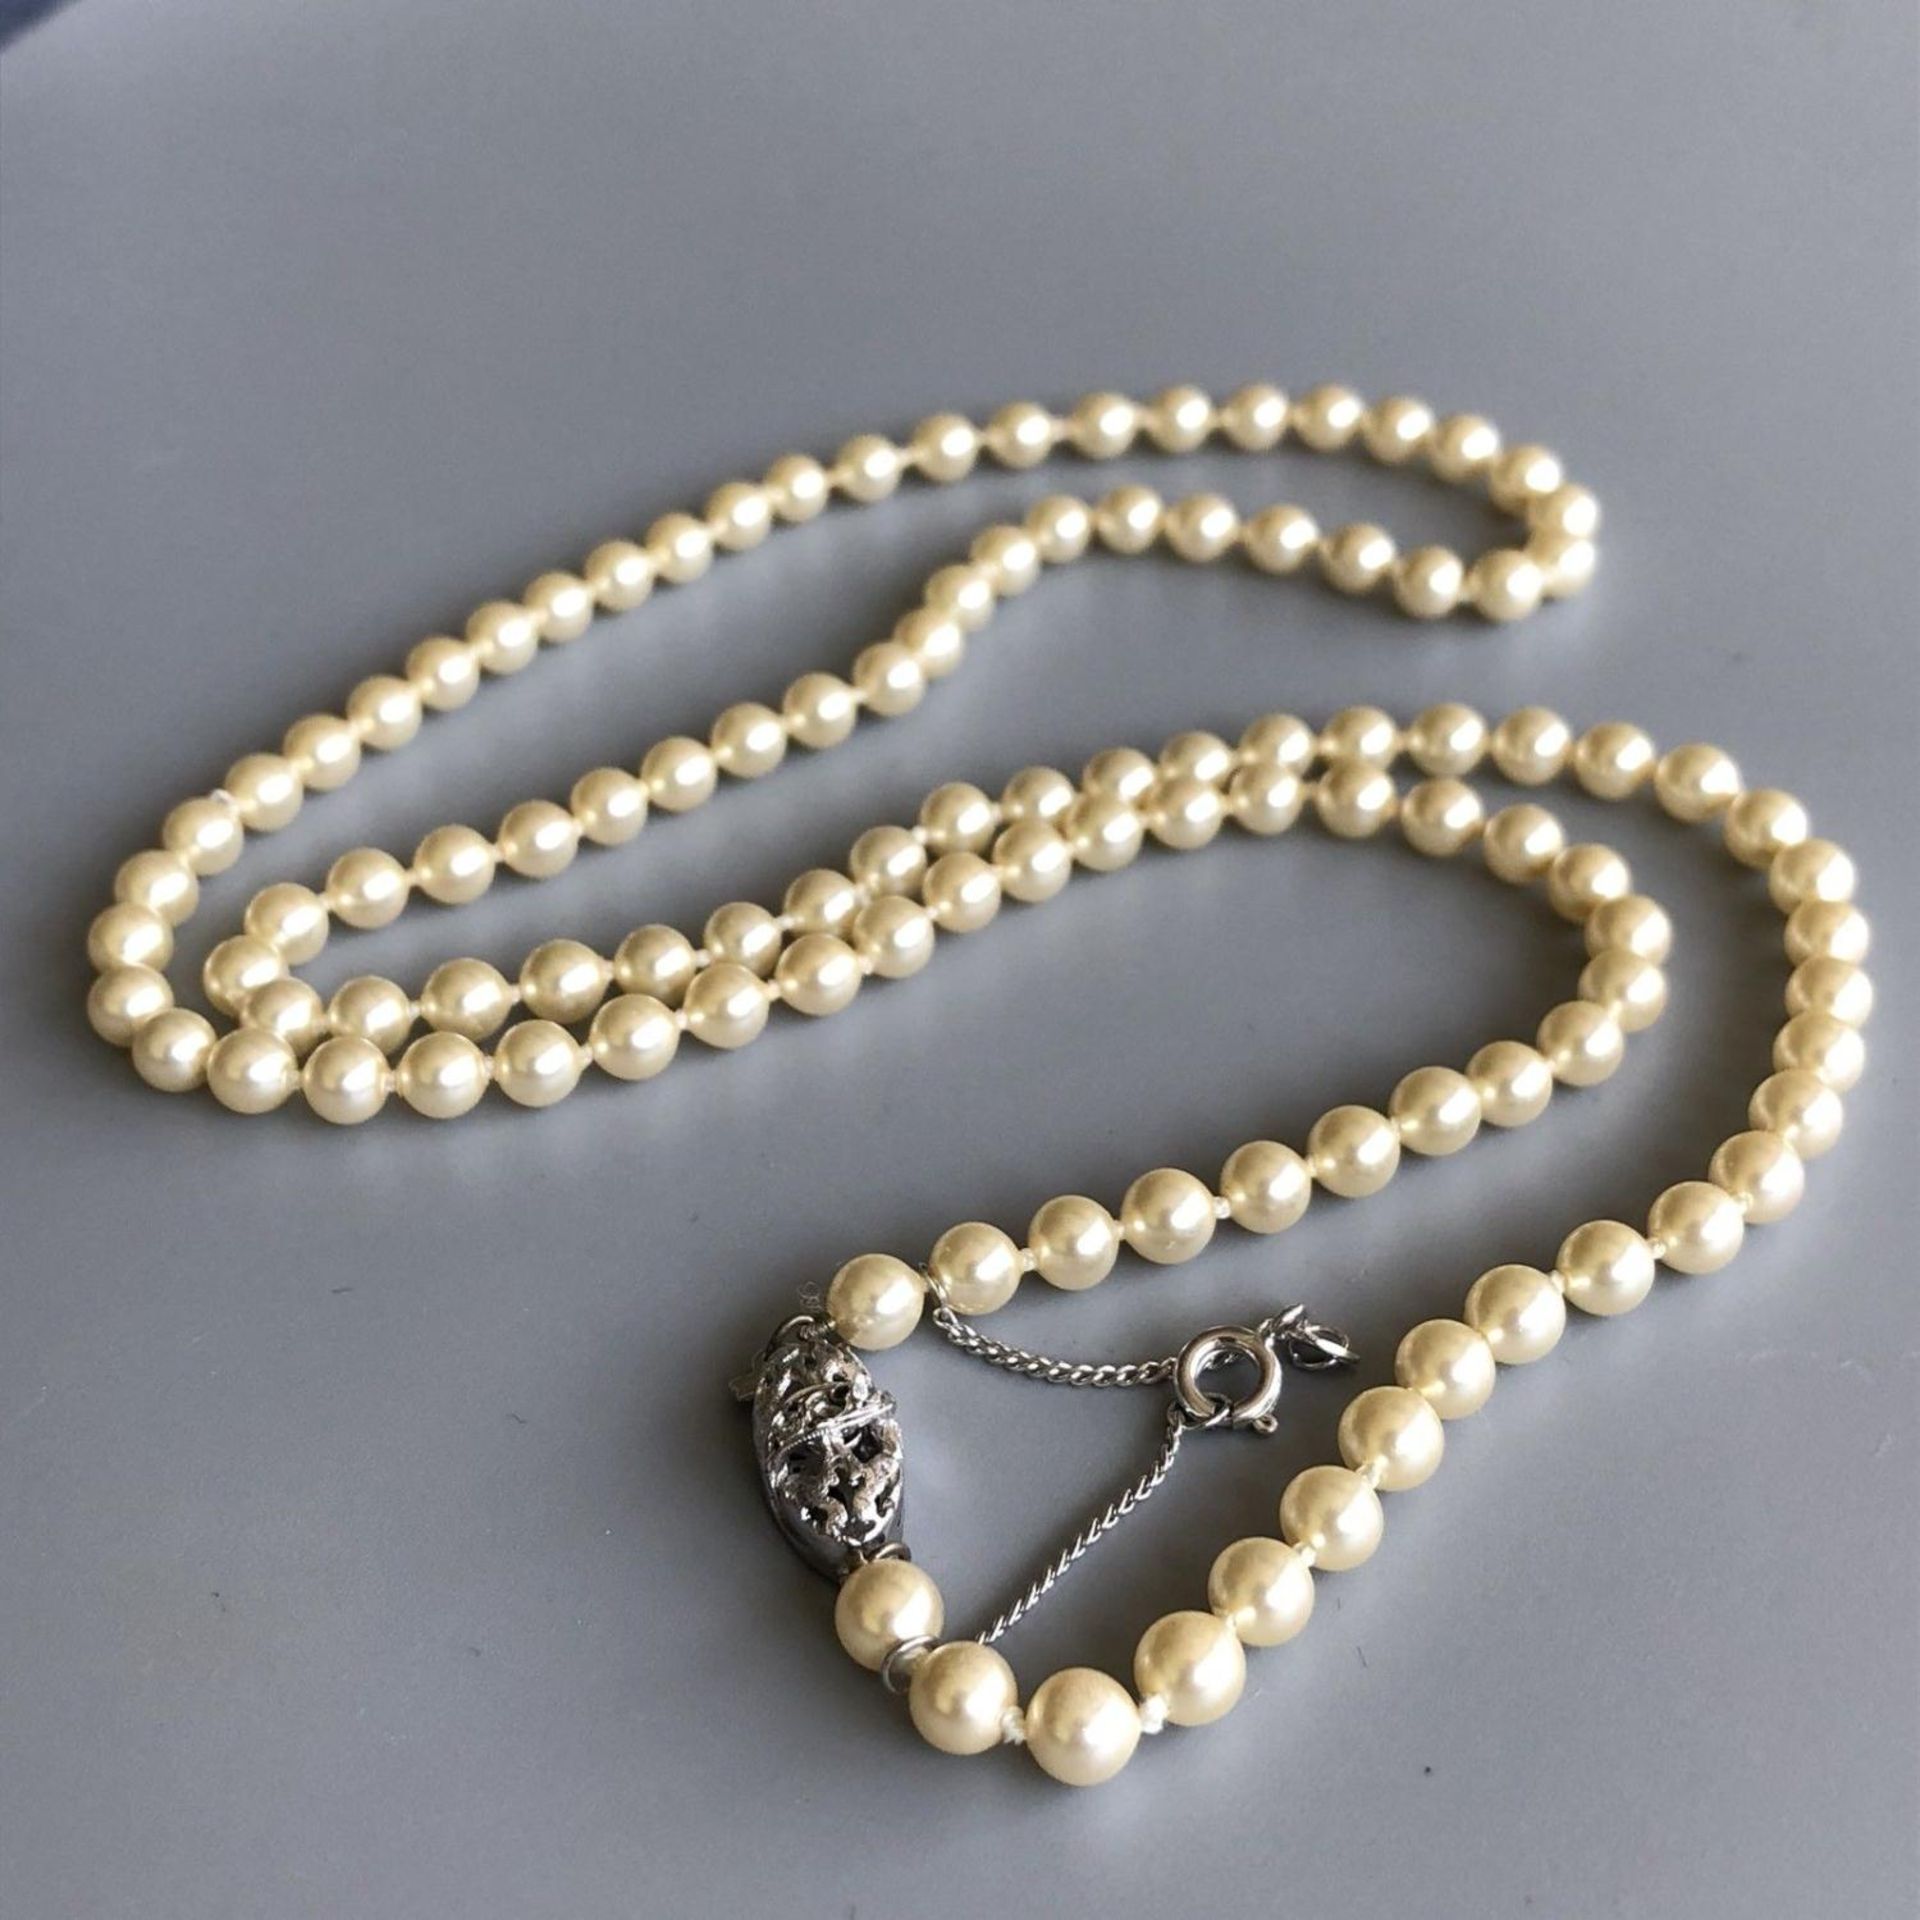 Faux pearl single strand long 28" necklace with 925 silver clasp